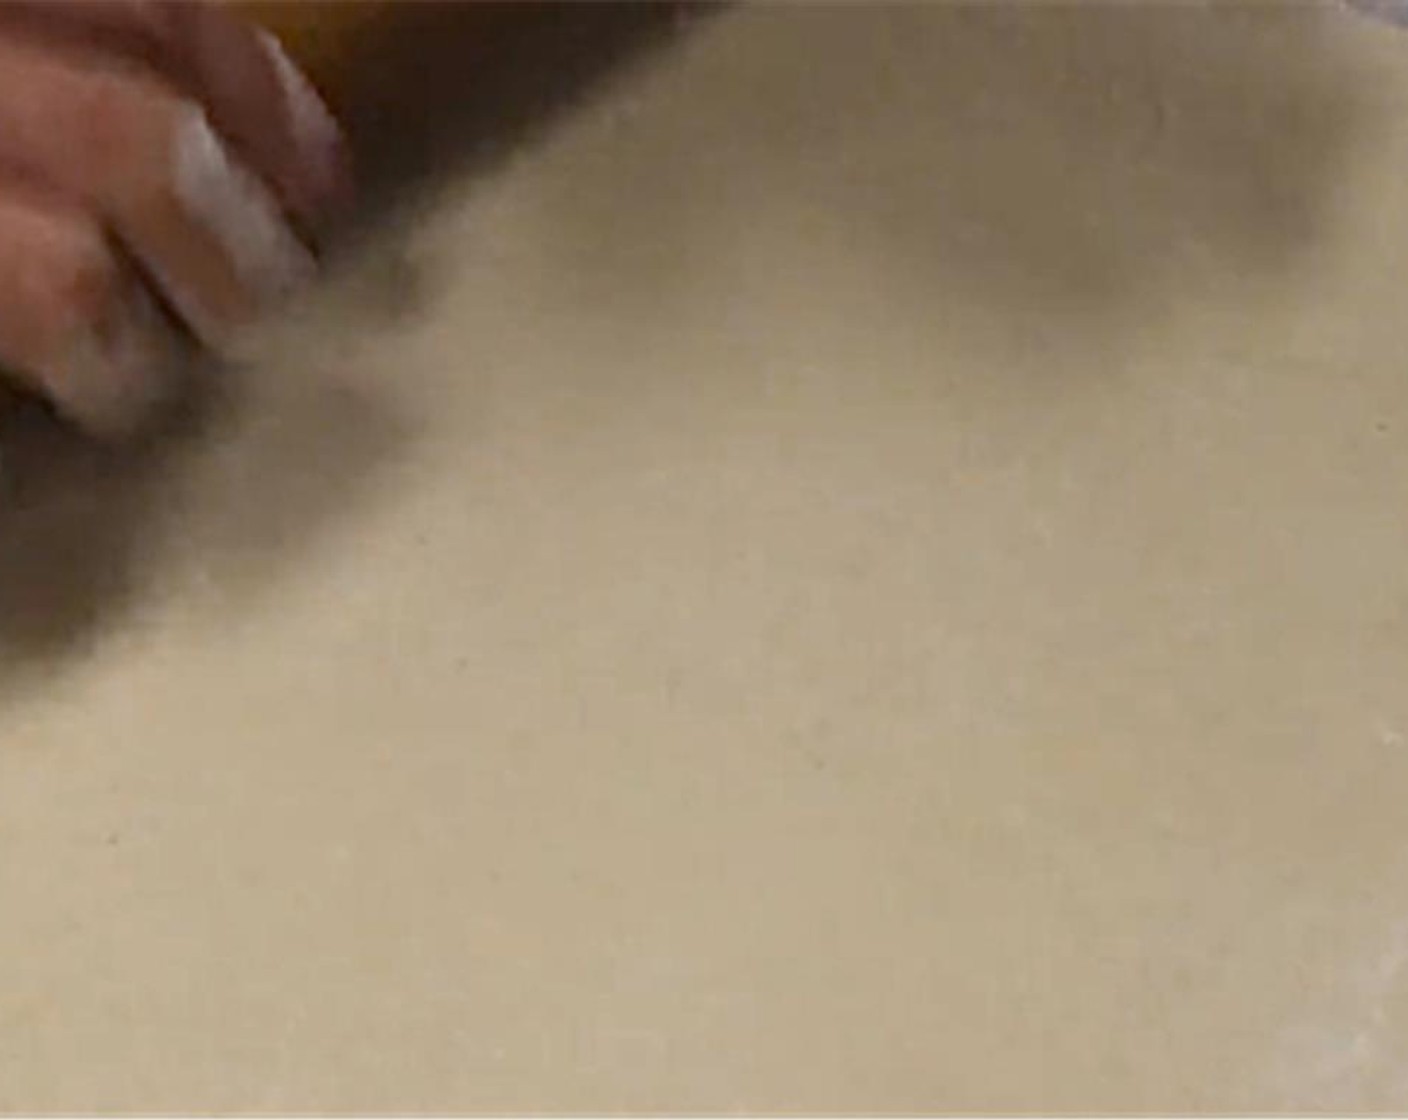 step 8 Sprinkle your work surface, rolling pin, and dough with flour. Take one of the four portions of dough and lightly flatten. Begin to roll the dough out to a square shape, roughly the width of 3 hands side by side.